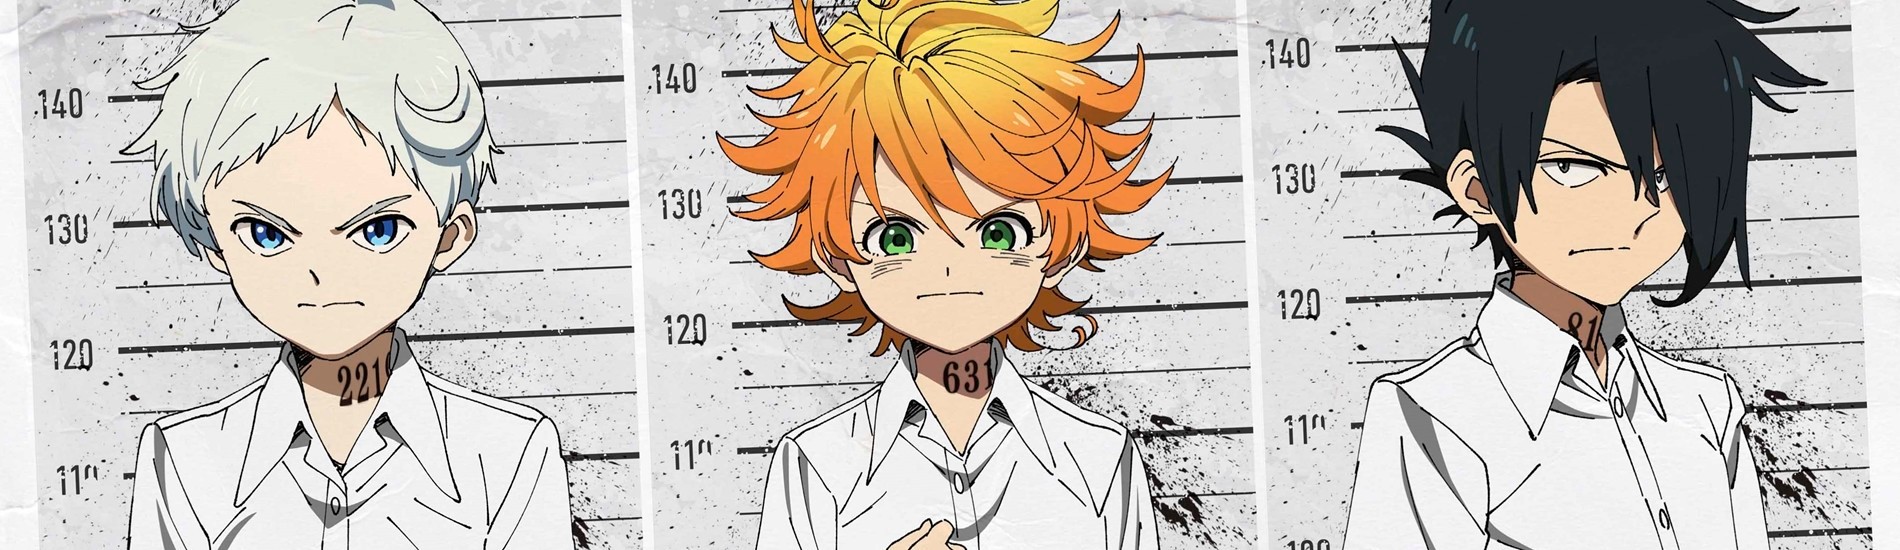 The Promised Neverland Anime Gets First Trailer & Character